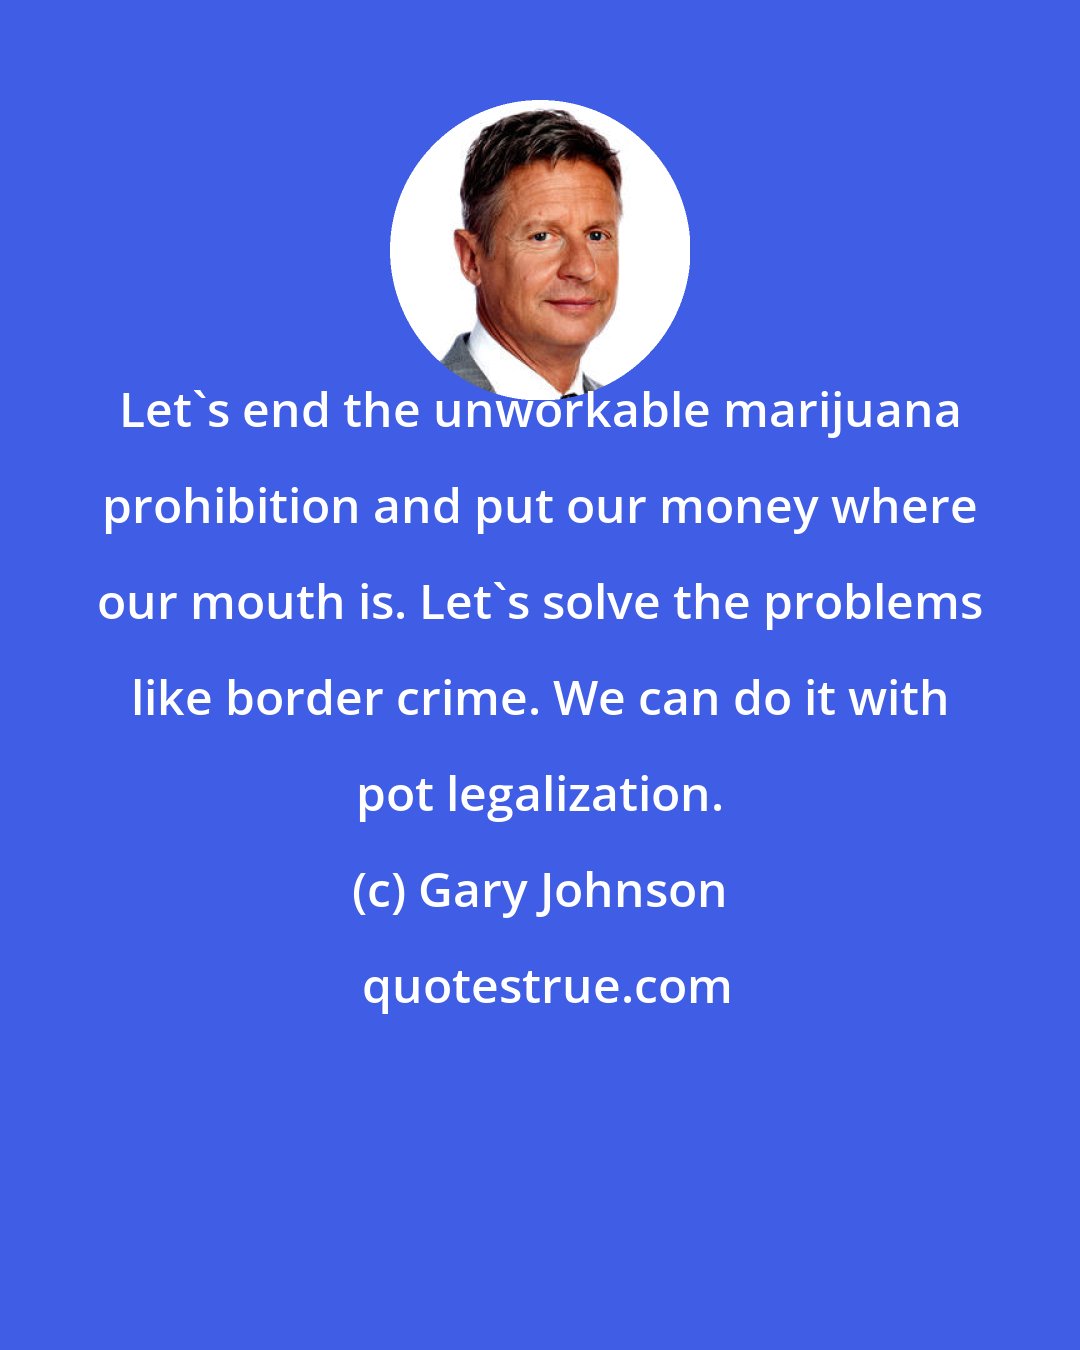 Gary Johnson: Let's end the unworkable marijuana prohibition and put our money where our mouth is. Let's solve the problems like border crime. We can do it with pot legalization.